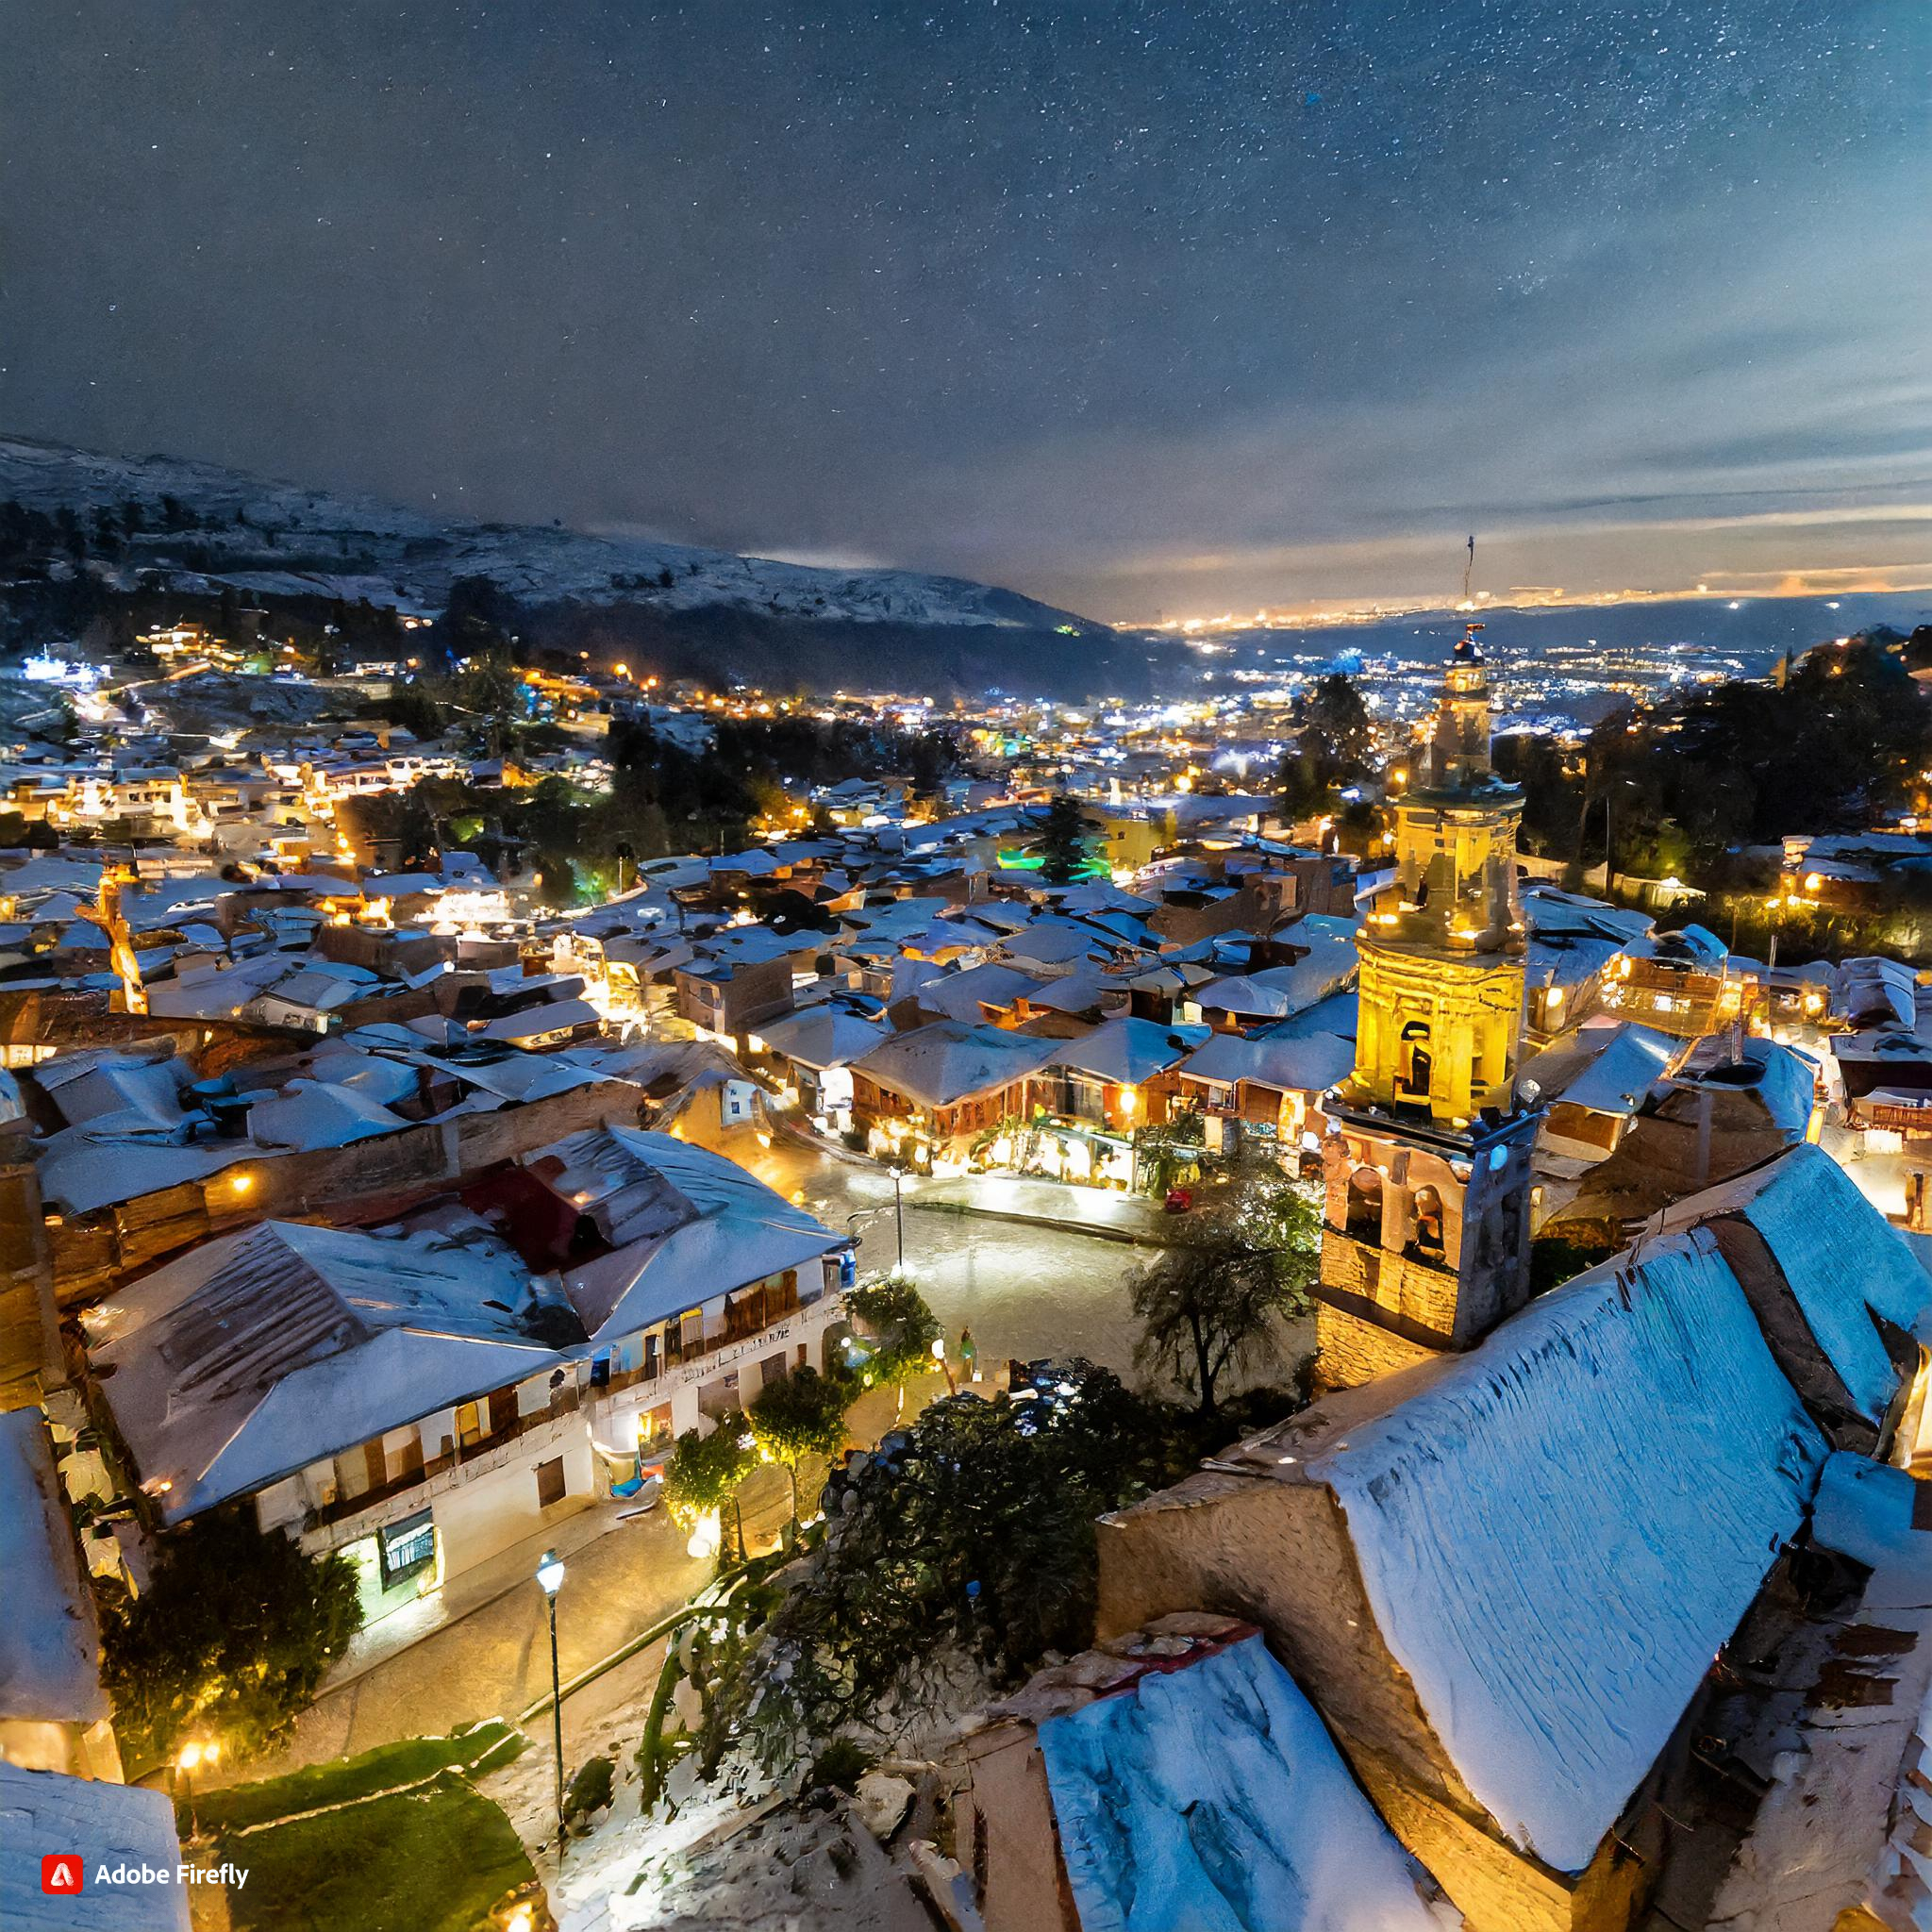  arial view of usuiah argenetina at night in the middle of winter